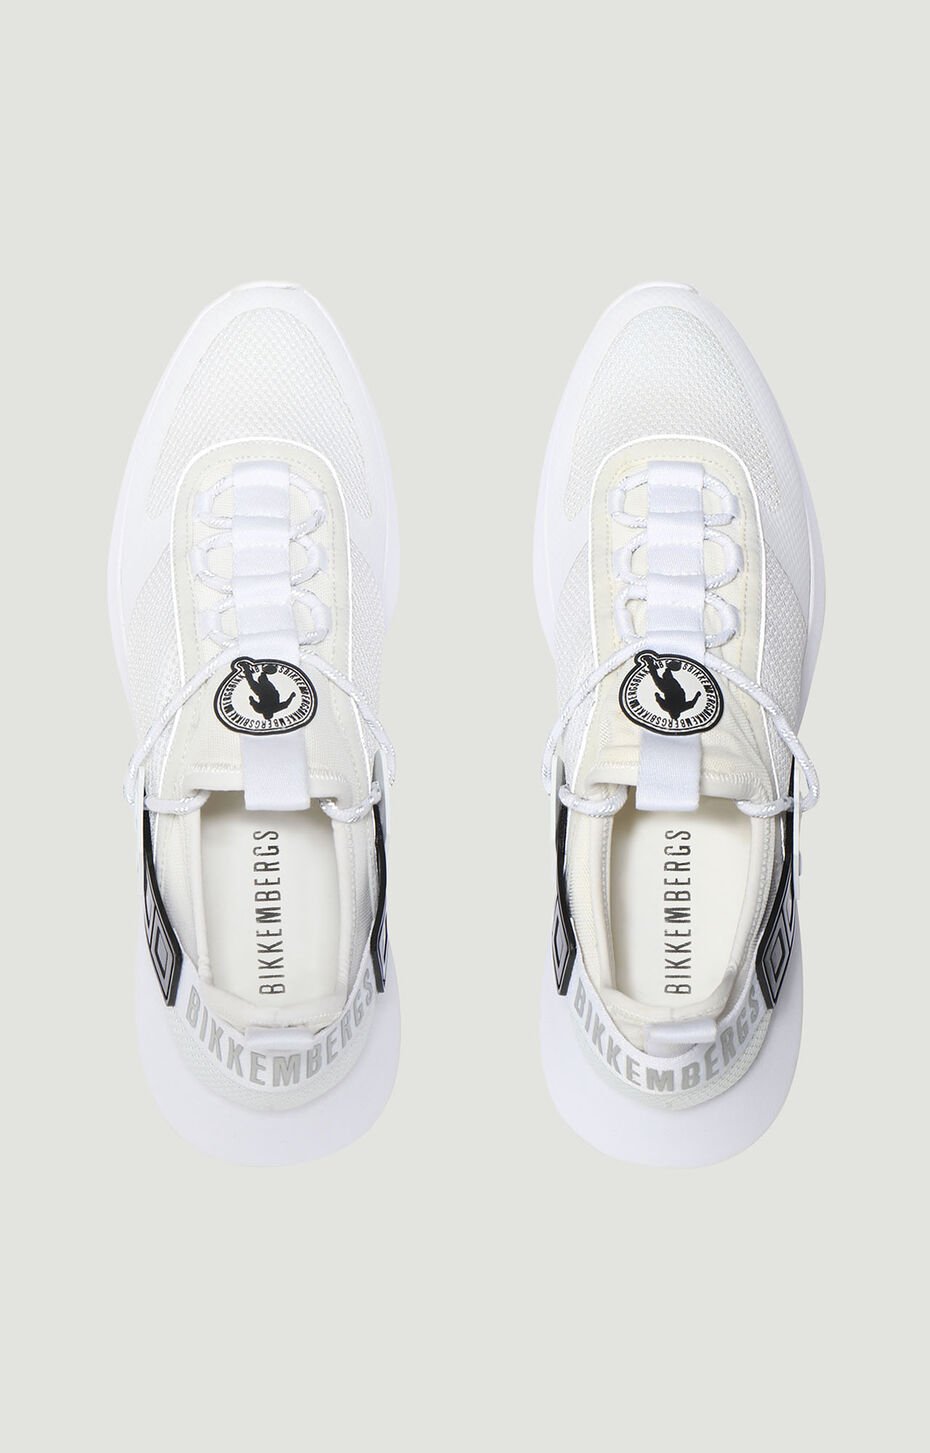 ATHLETIC/SNEAKERS, WHITE, hi-res-1